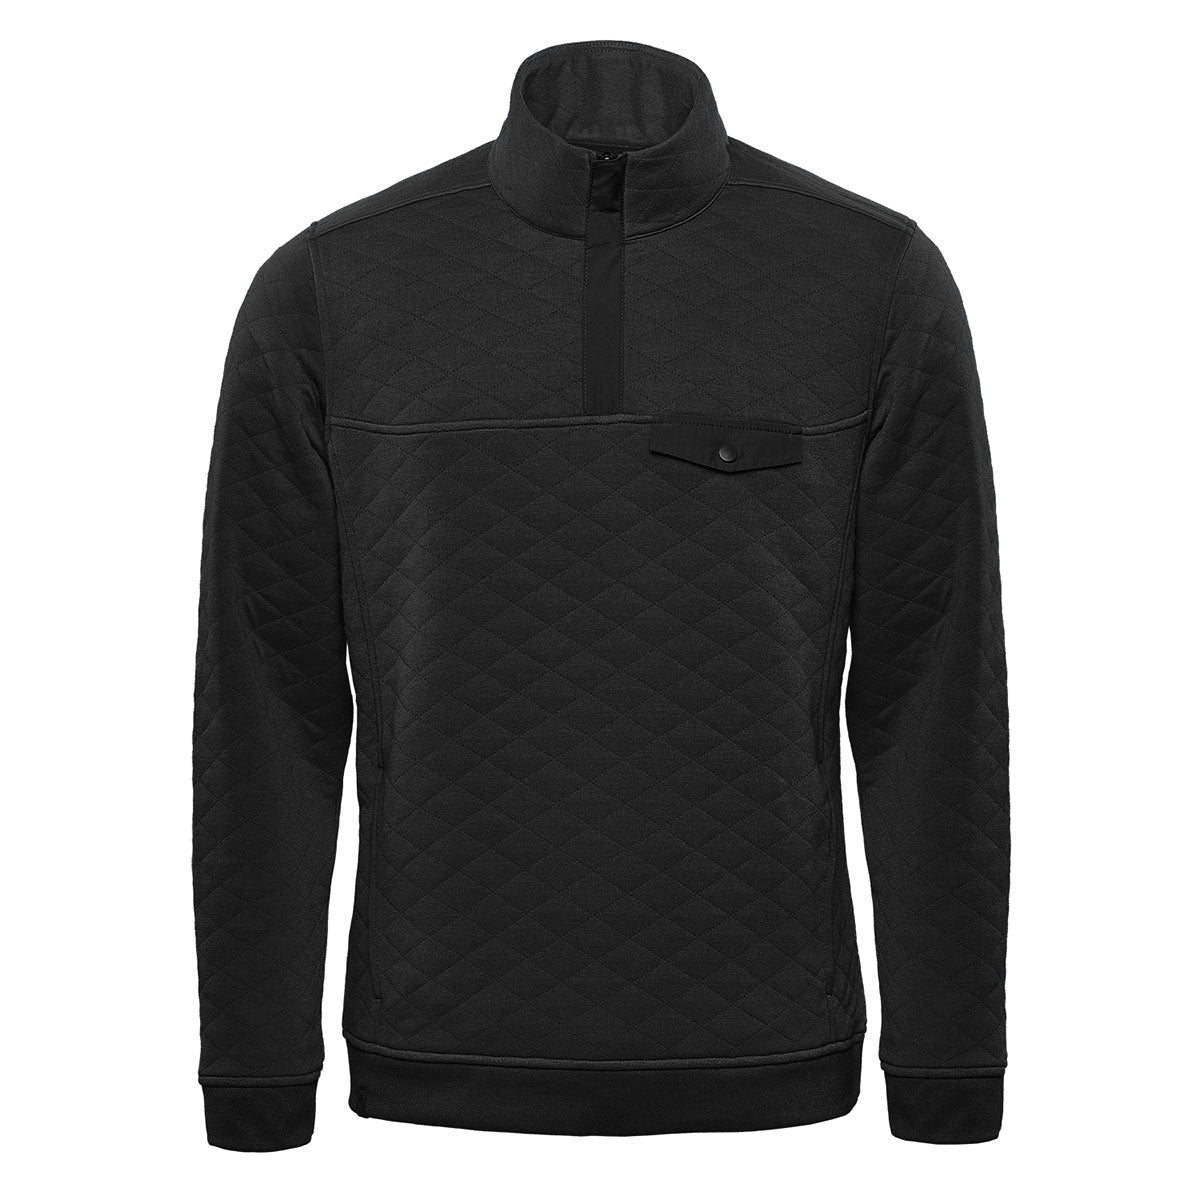 KXP-1 - Montebello Thermal 1/4 Zip Pull Pour Homme